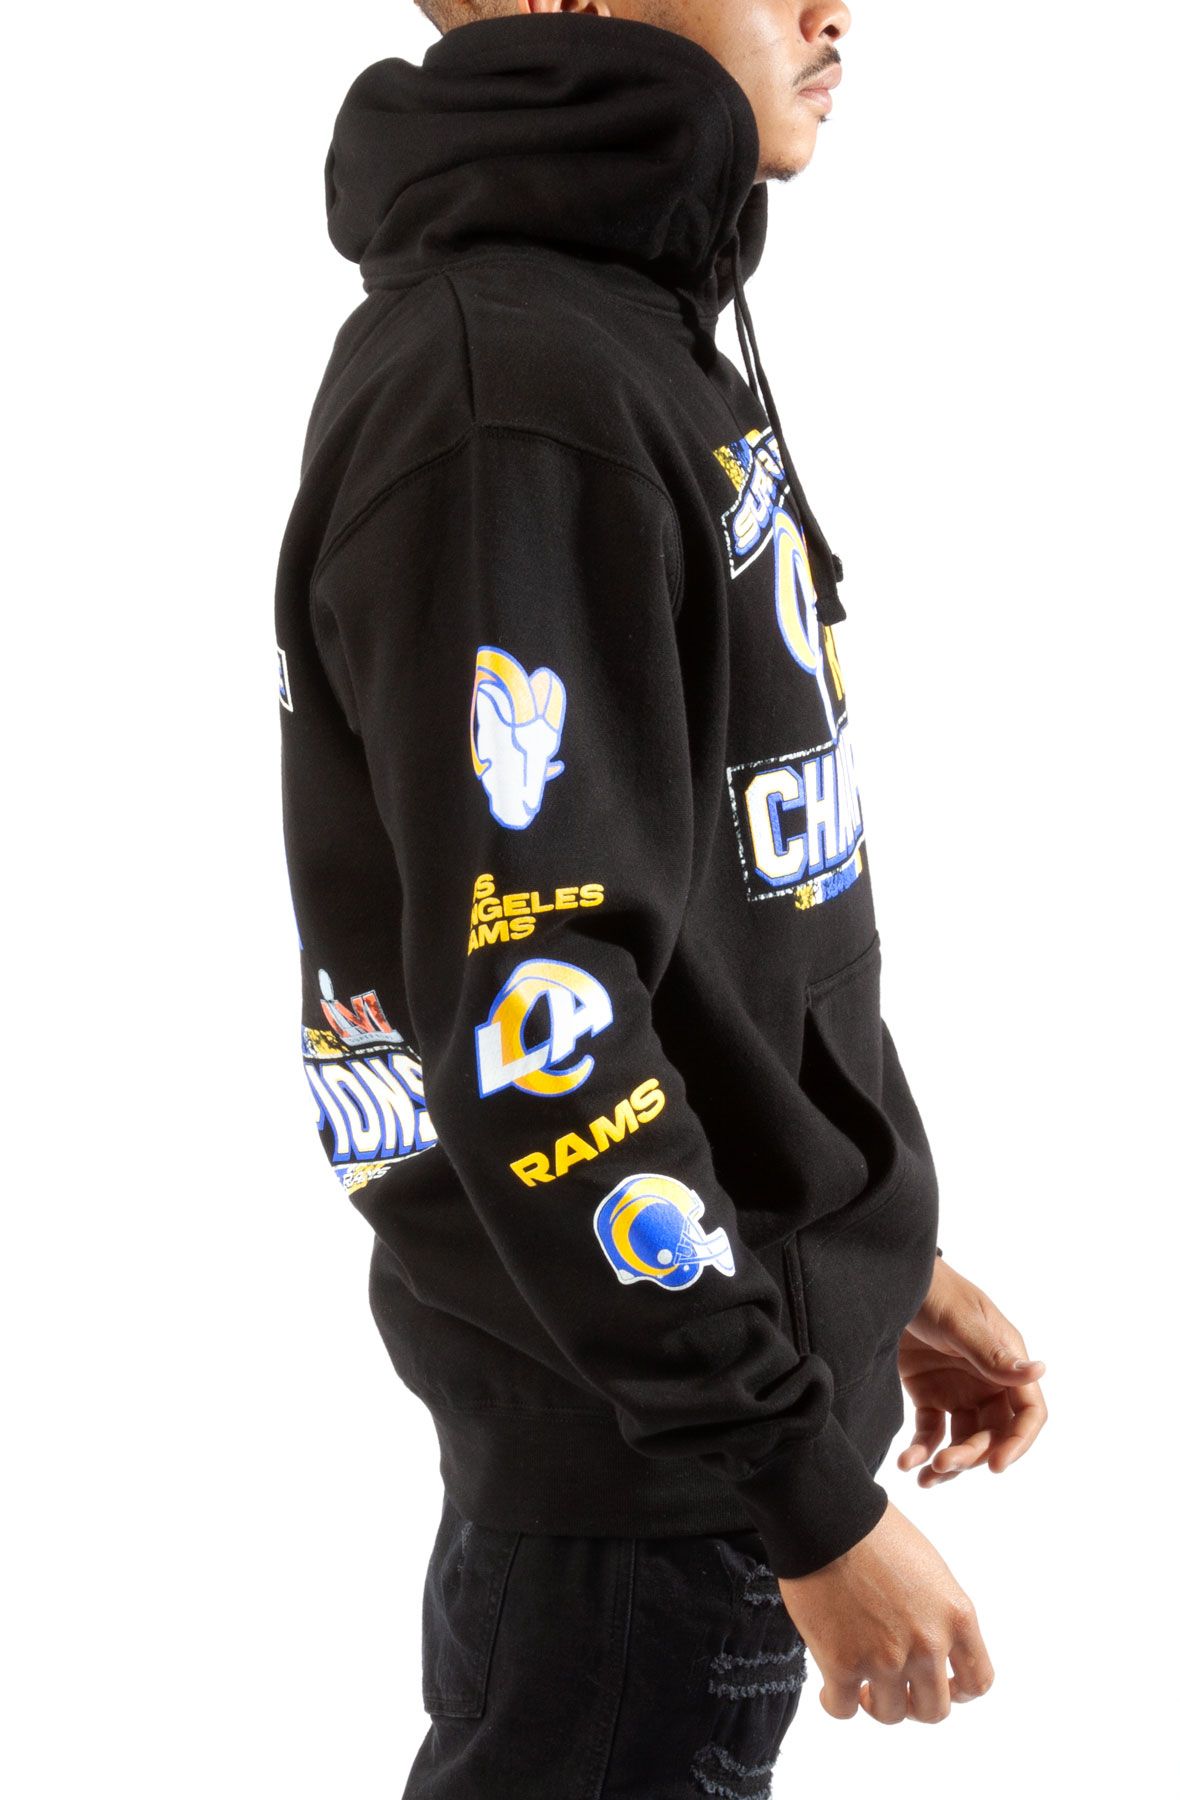 Los Angeles City of Champions - Rams Fan HOODIE 2 Sided Print - Navy, Size L